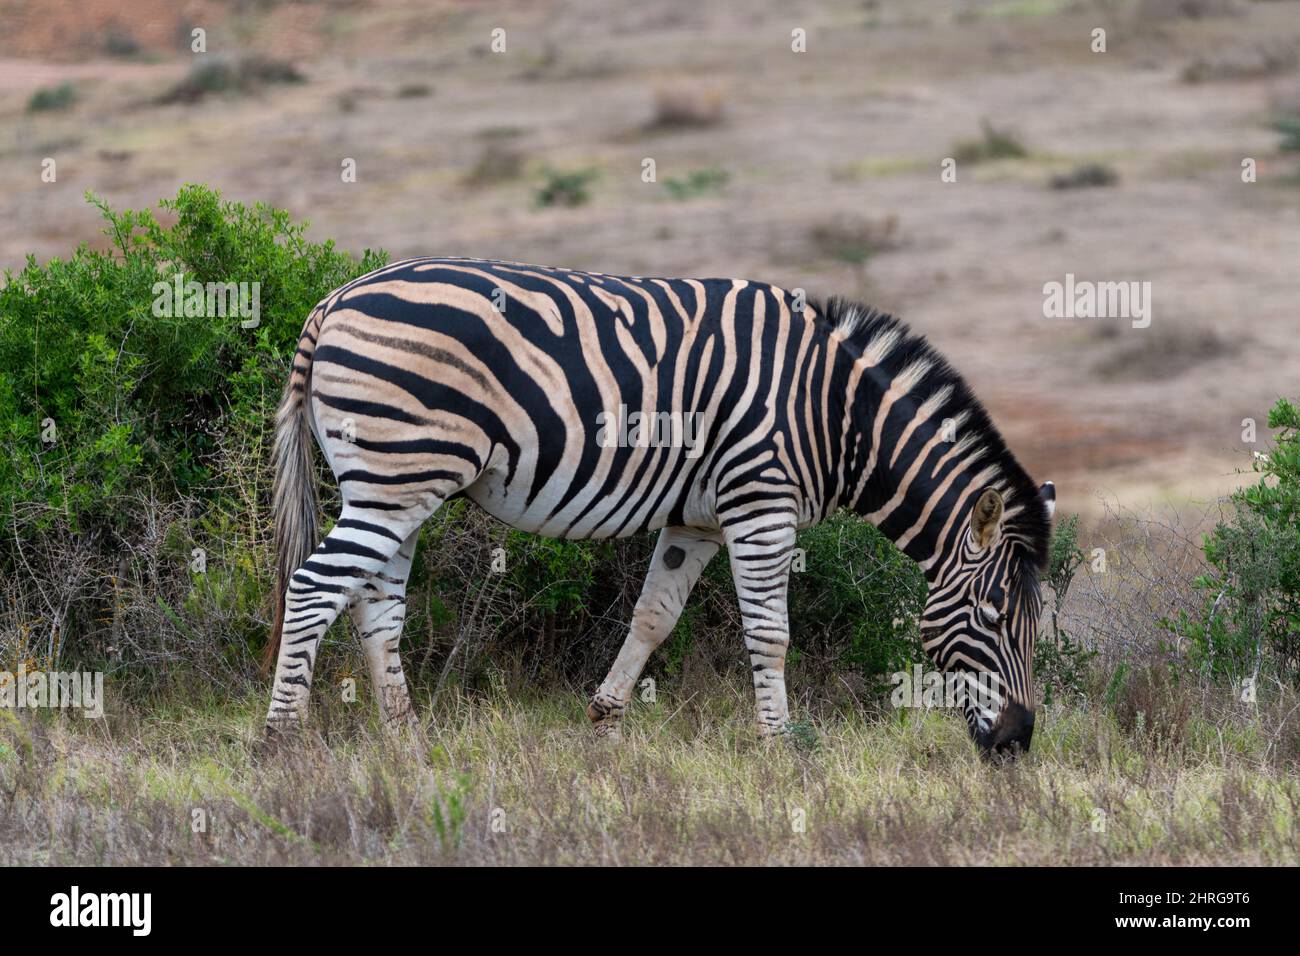 A zebra grazes in the wilds of Africa Stock Photo